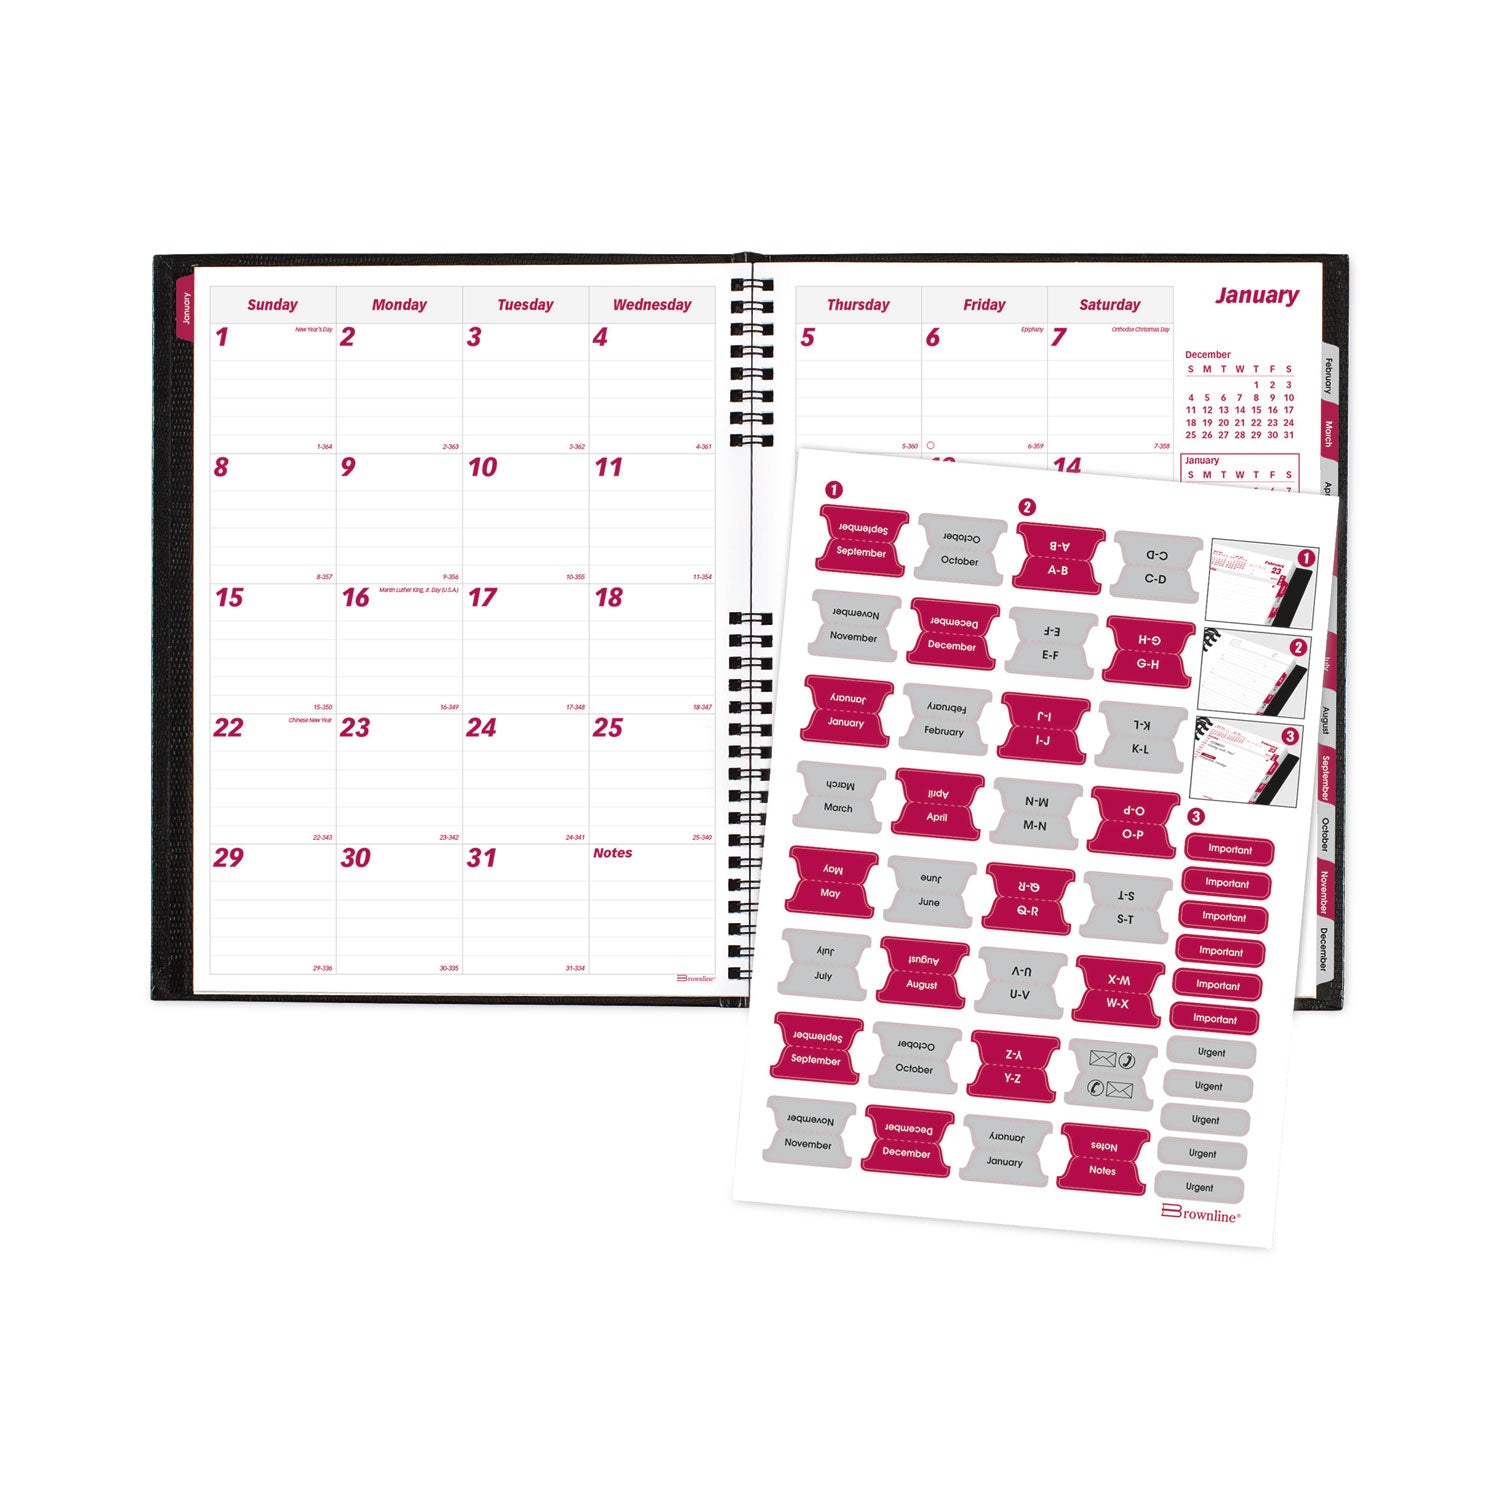 coilpro-14-month-ruled-monthly-planner-11-x-85-black-cover-14-month-dec-to-jan-2023-to-2025_redcb1262cblk - 2